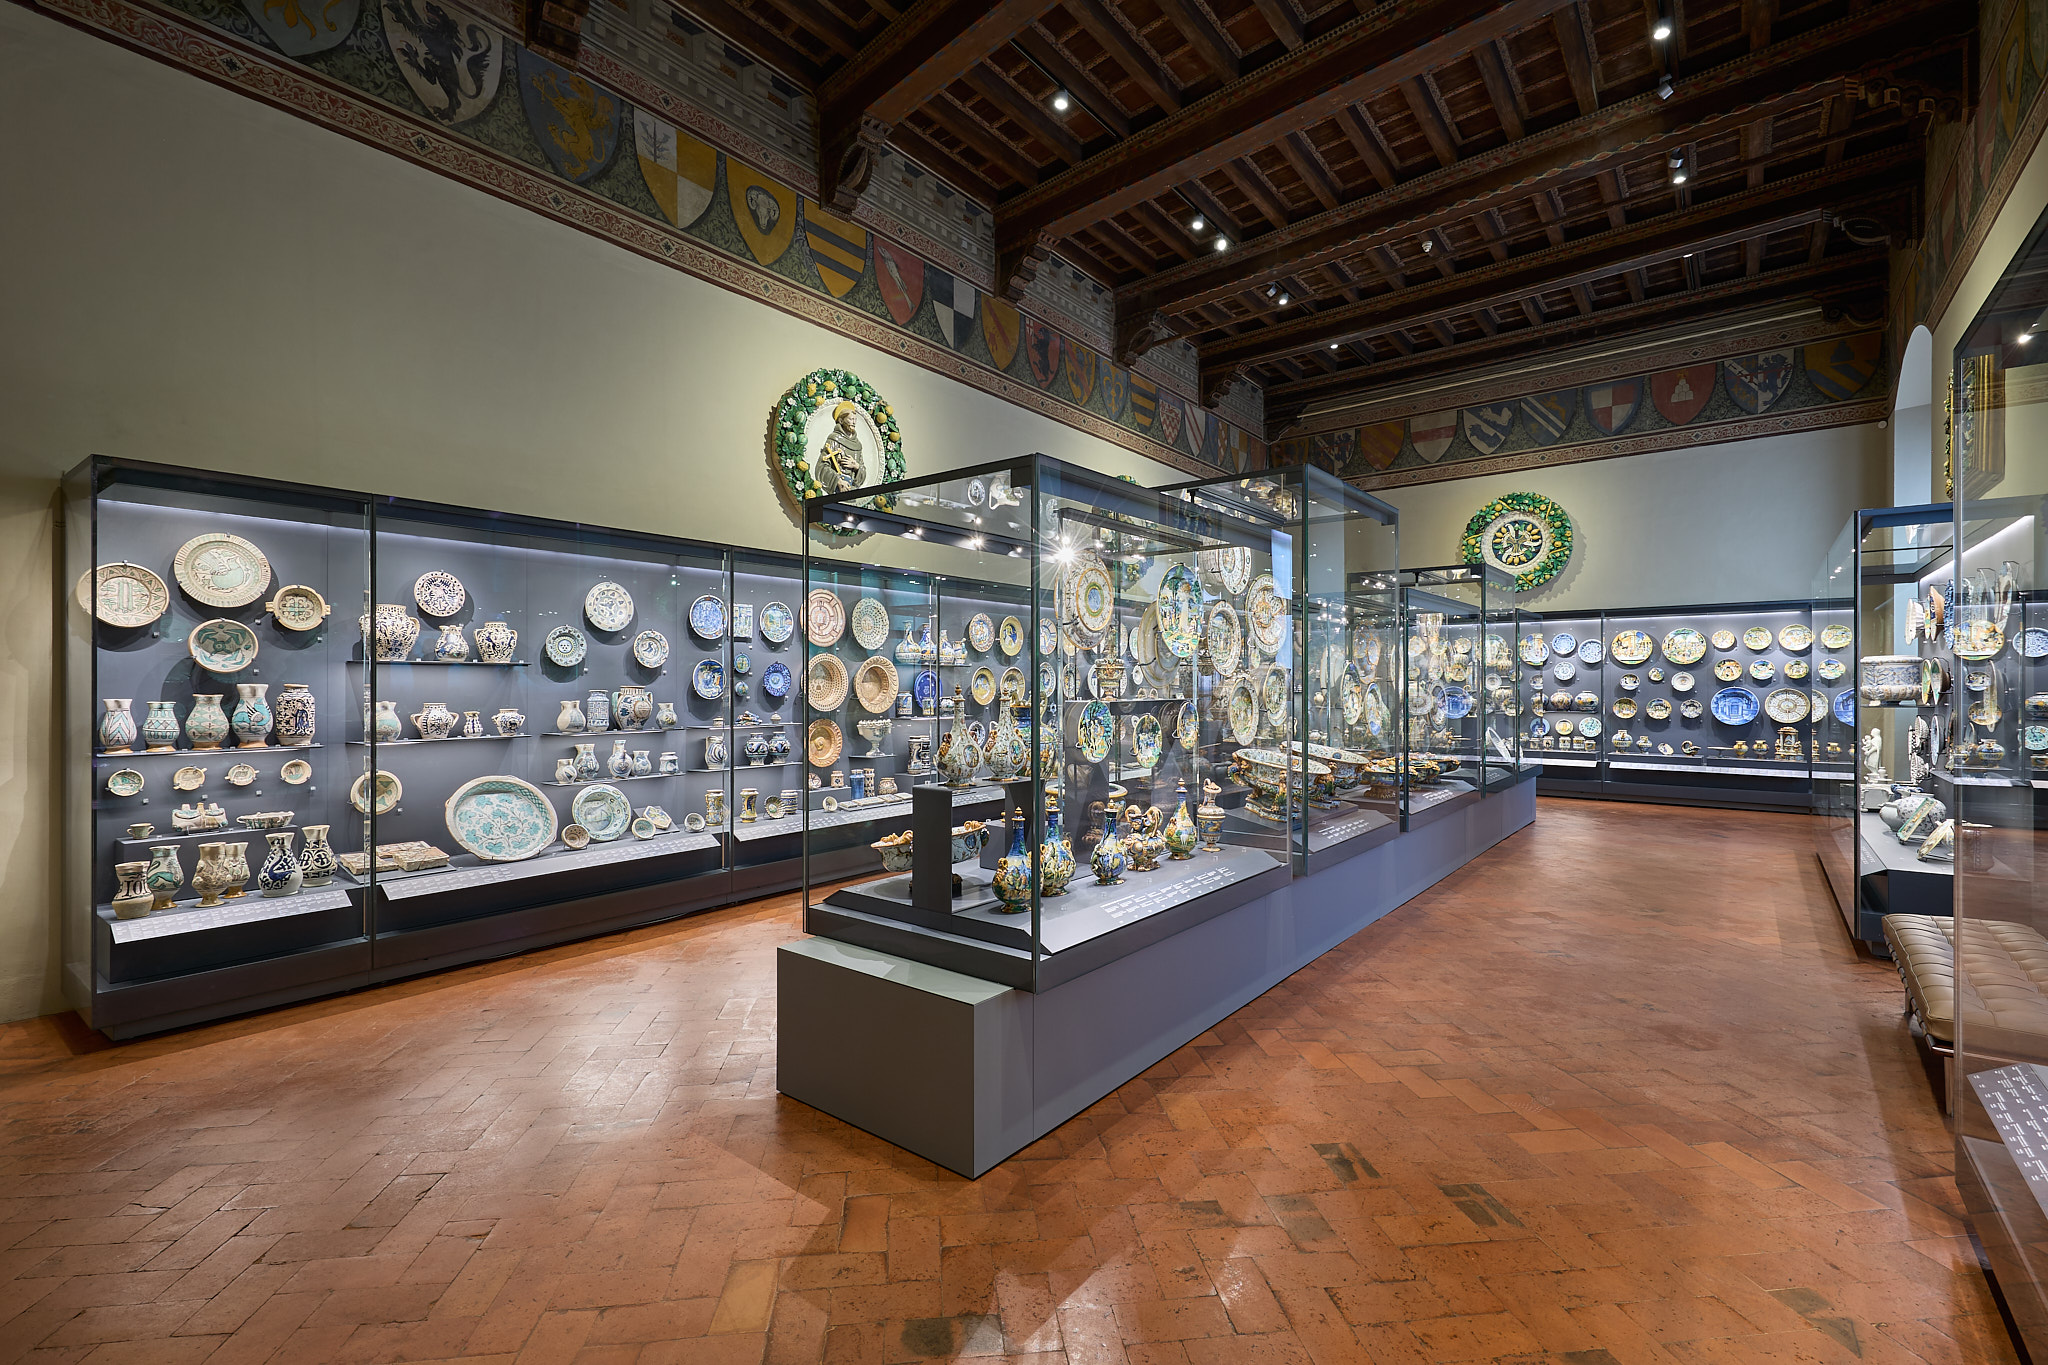 Updated Maiolica Room at the Bargello Museums